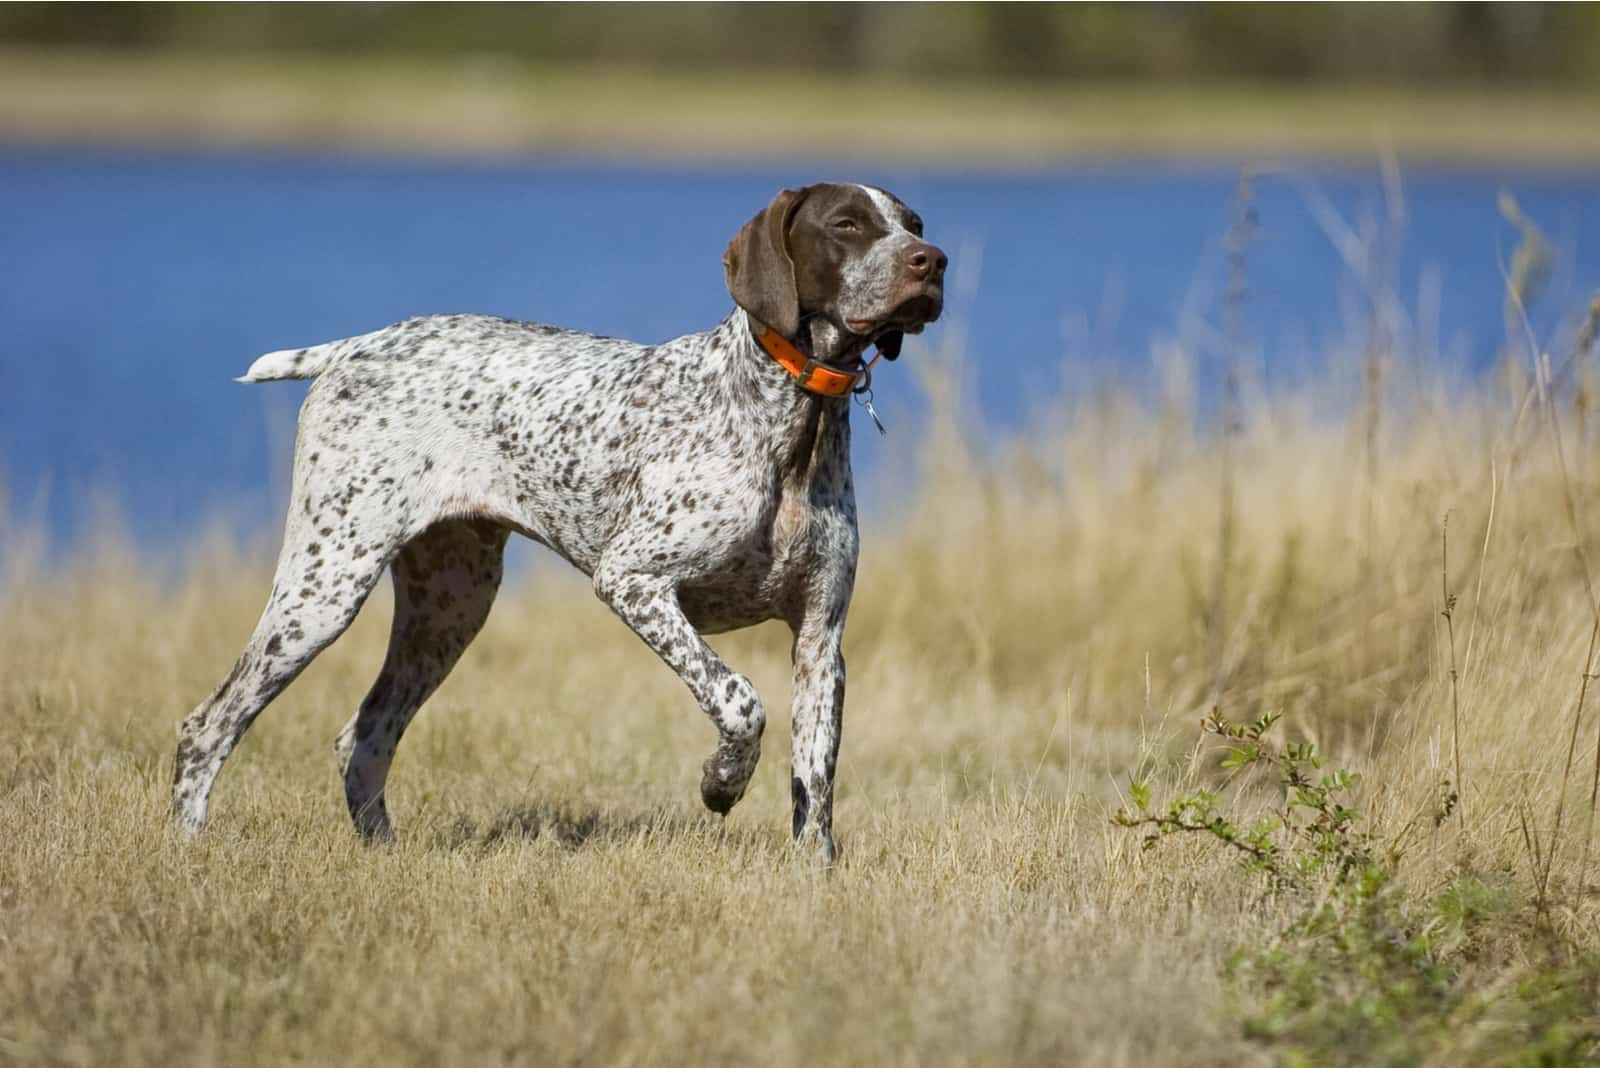 German Shorthaired Pointer dog by water